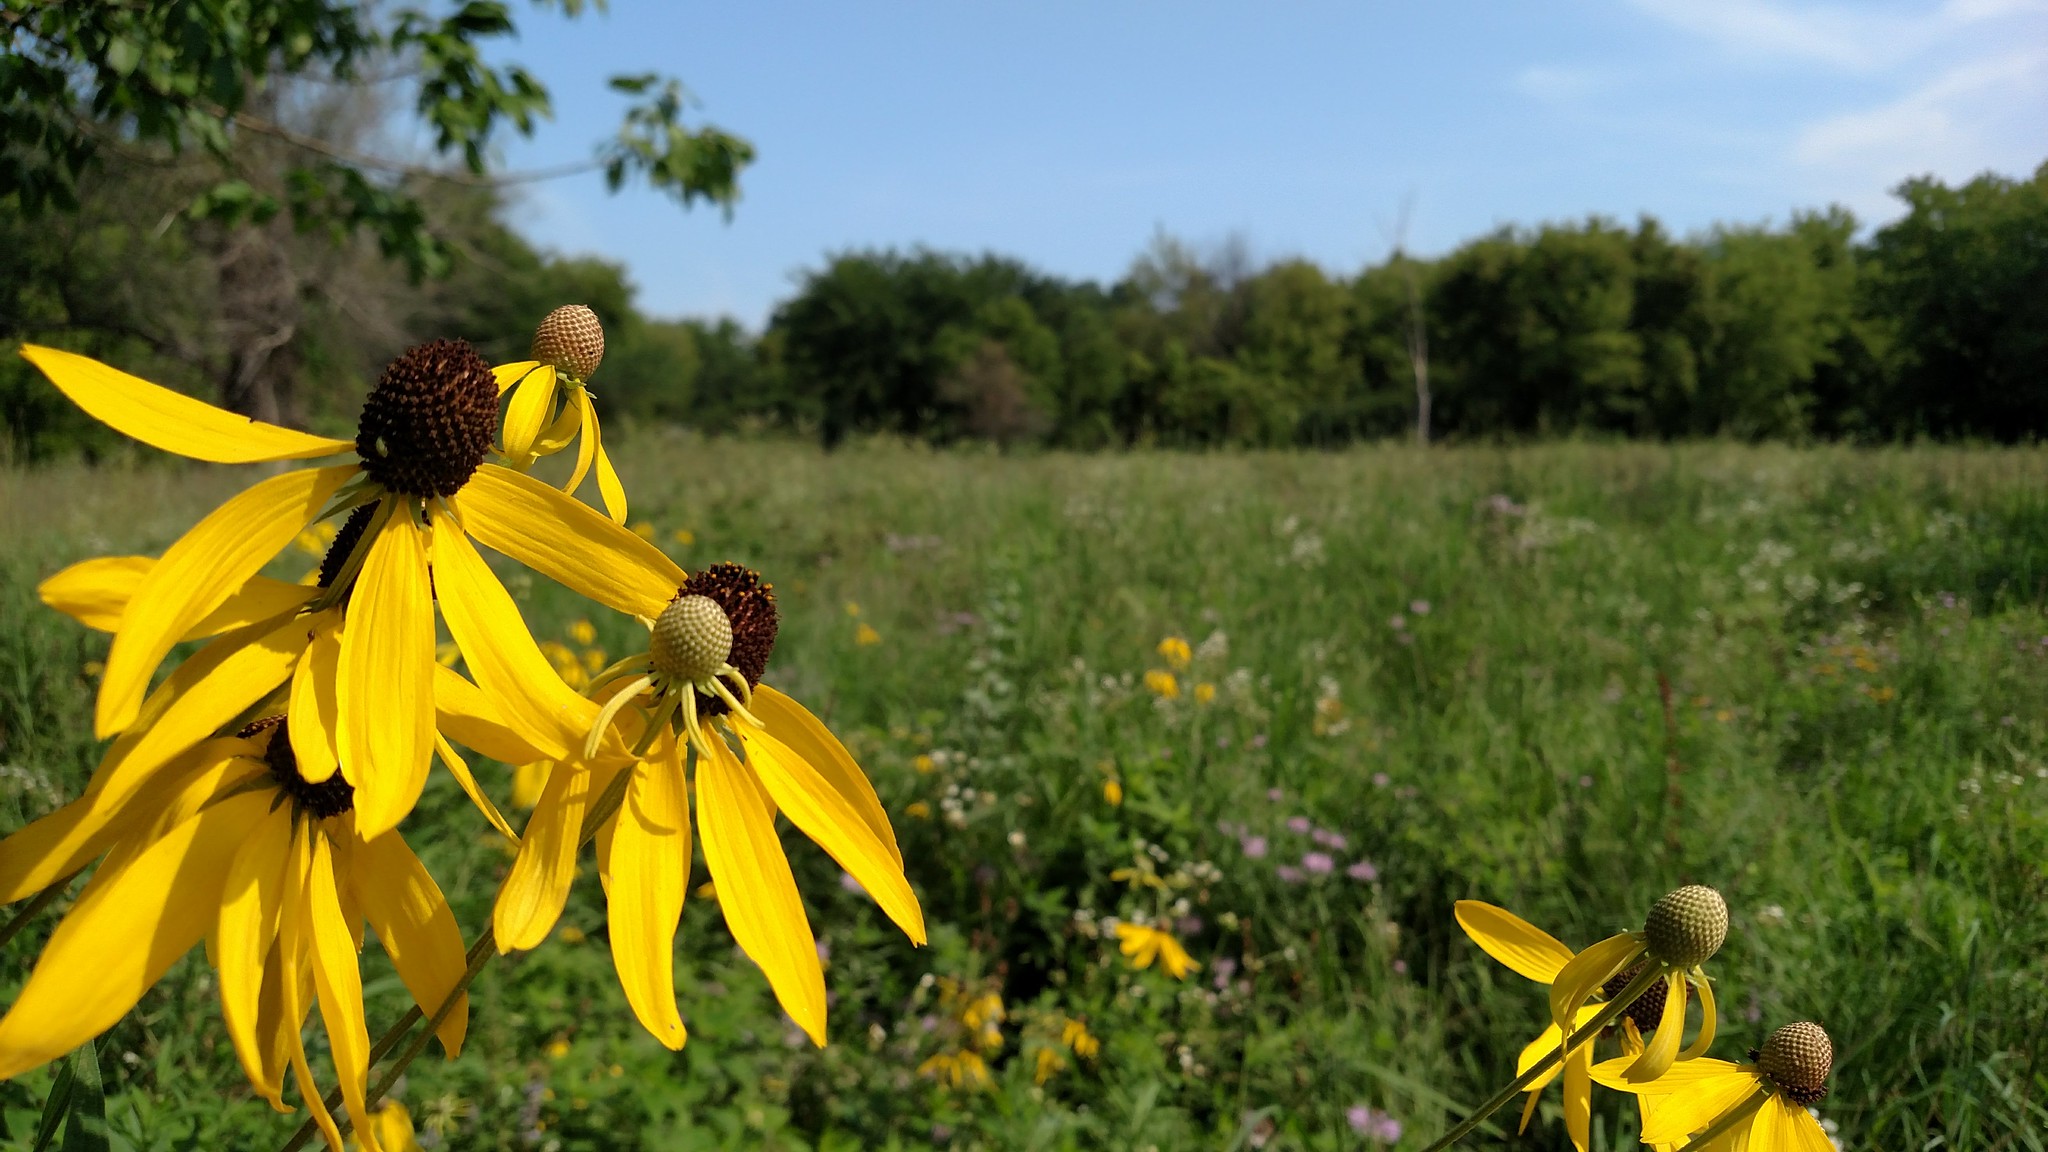 Gray-headed coneflowers in a prairie at Vermillion River Linear Park